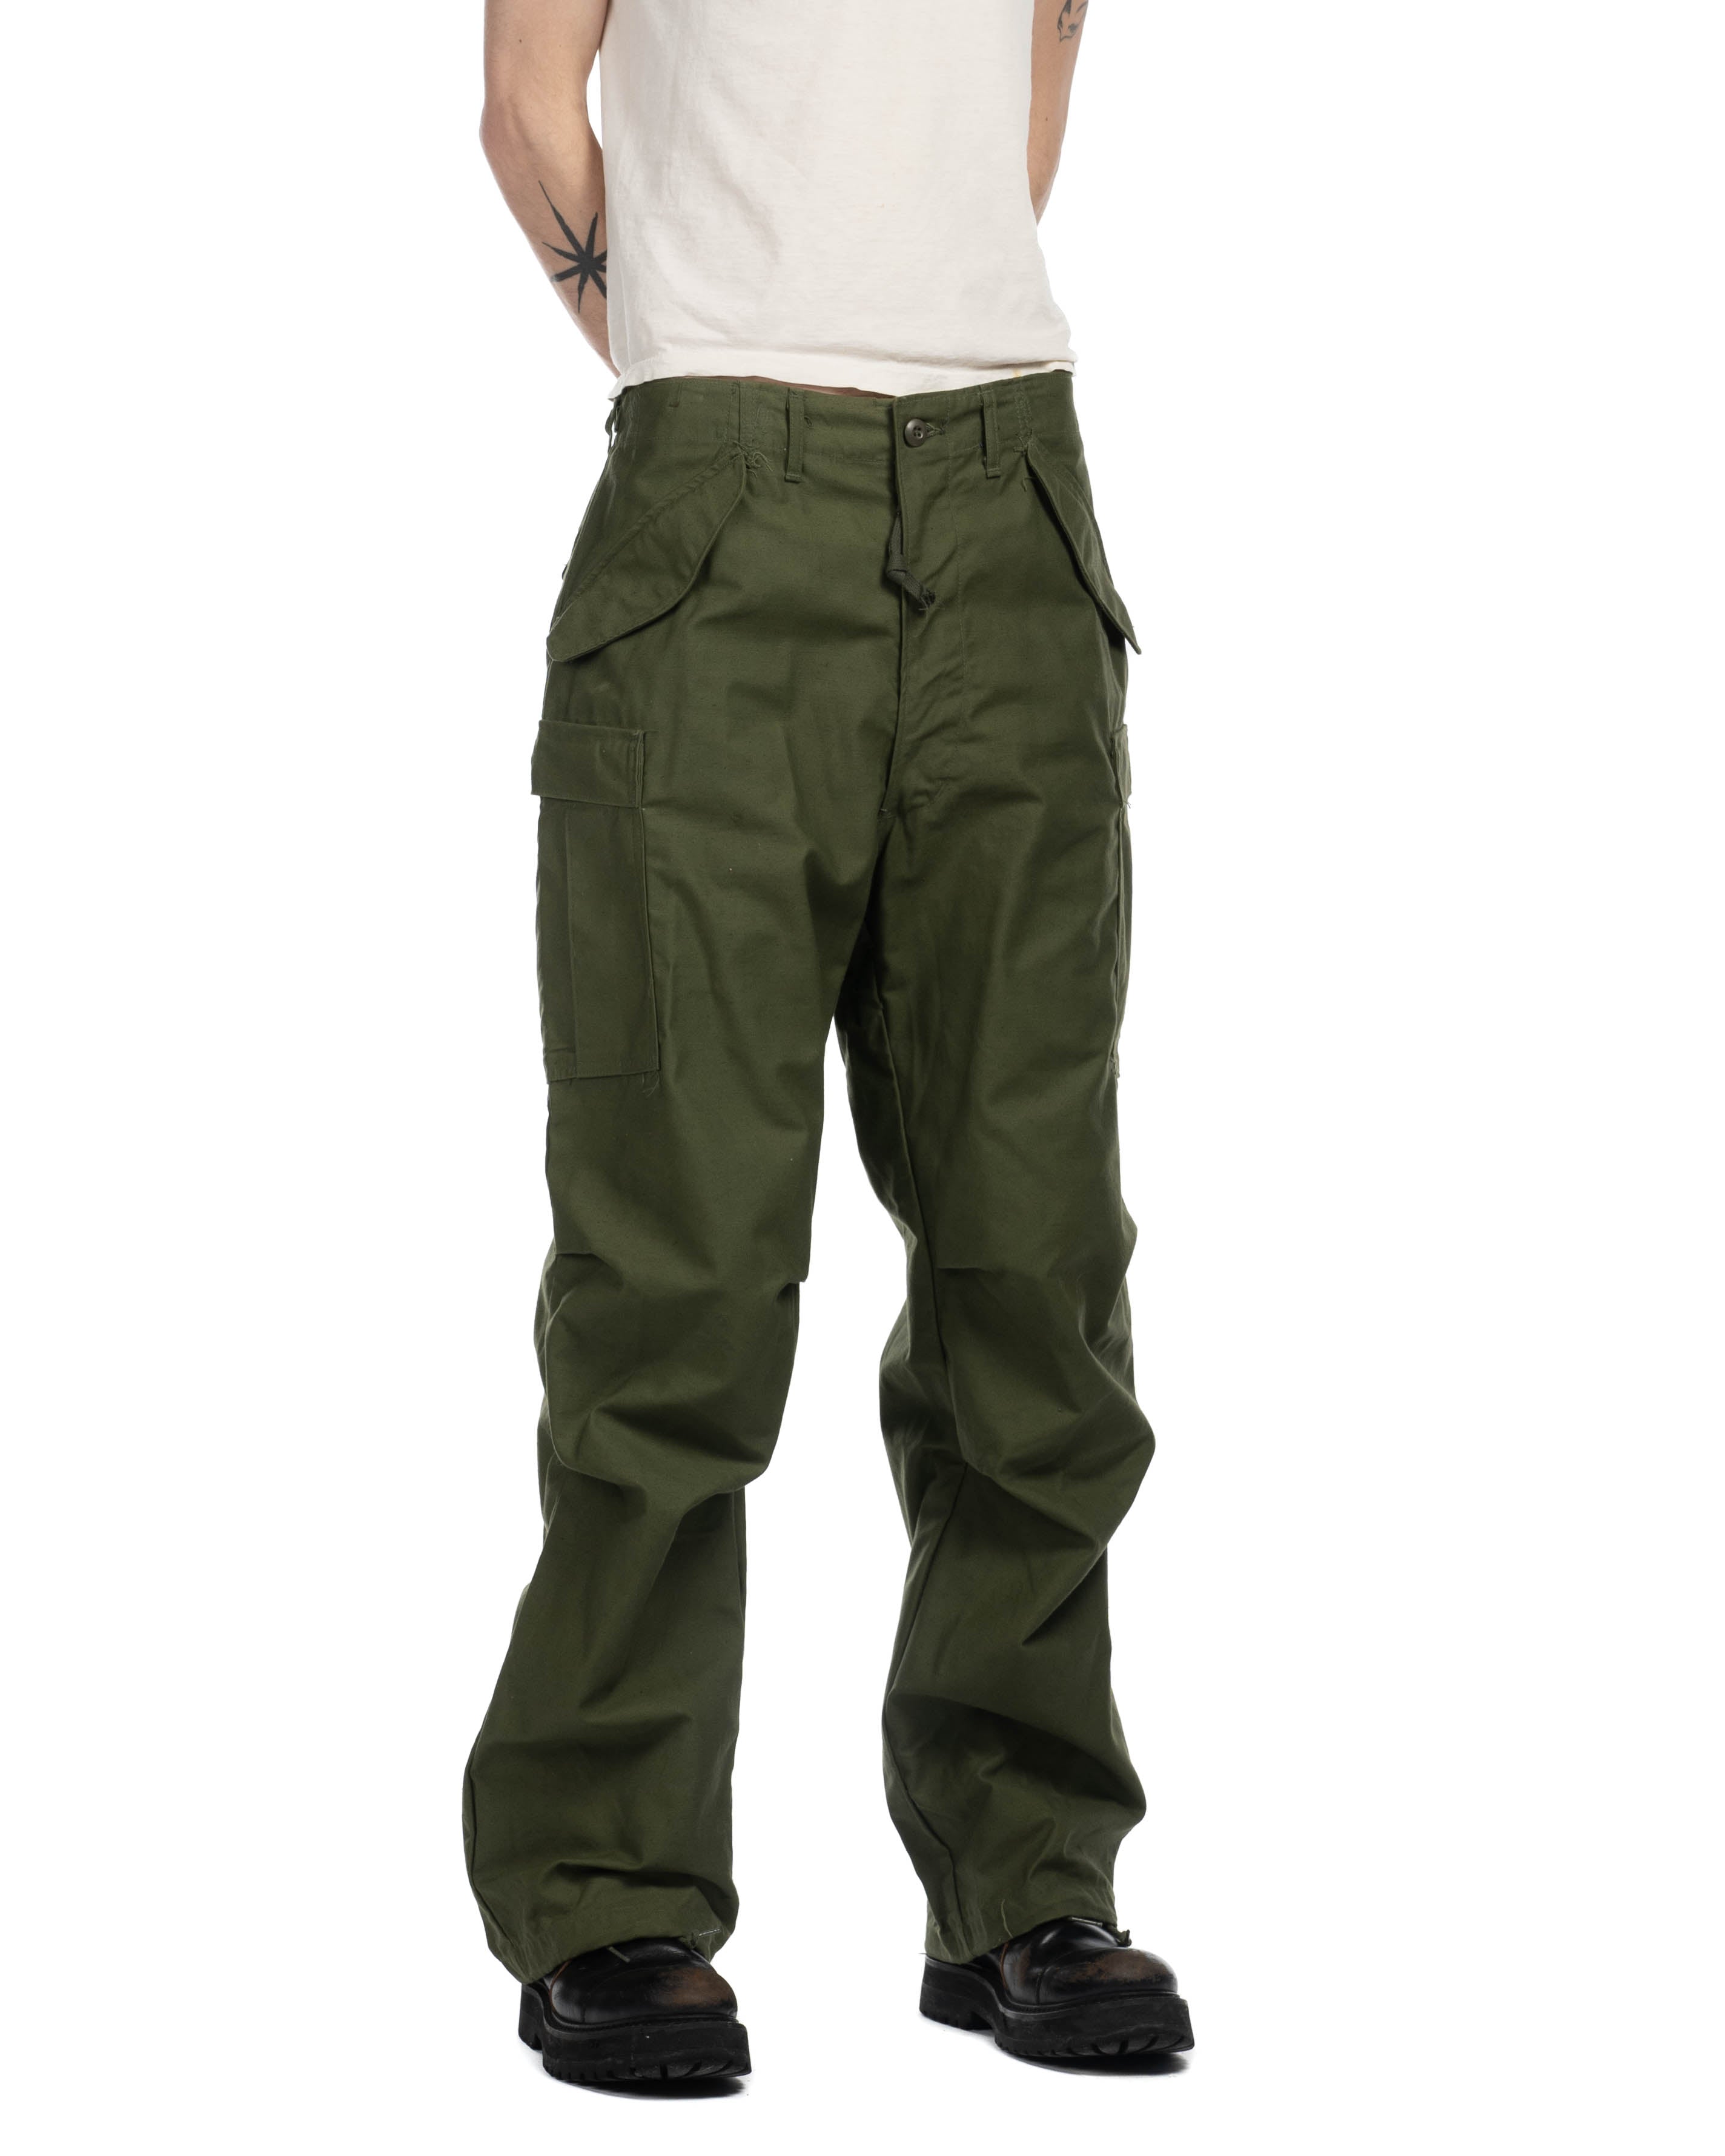 WILD THINGS MARSHMALLOW ECWCS GEN III L7 LARGE TROUSERS EXT COLD WEATHER  PANTS – Forcenxt